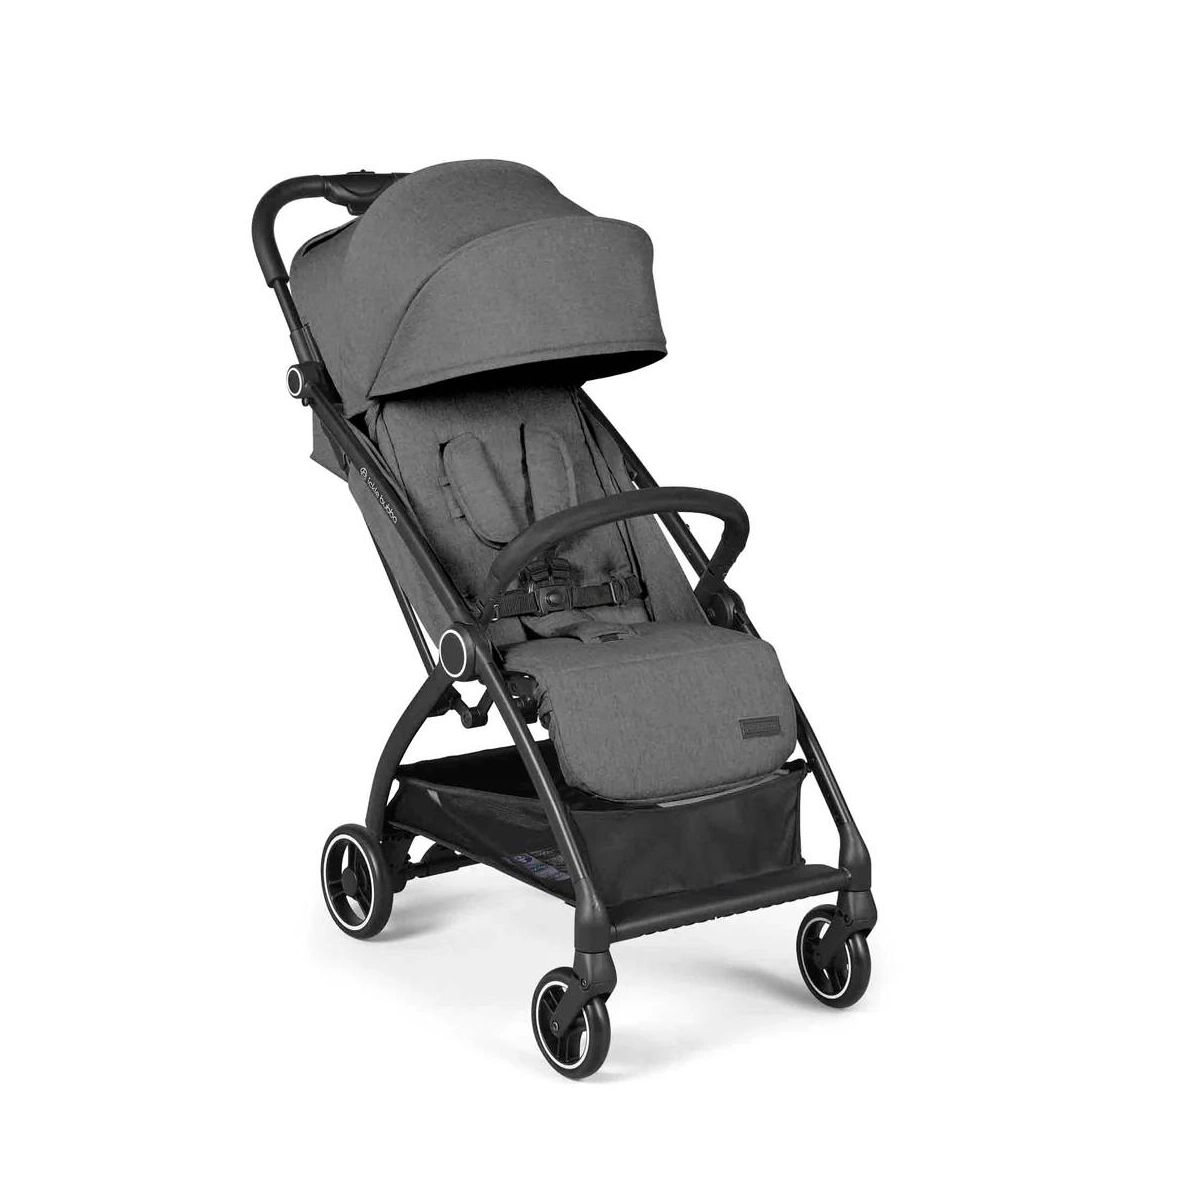 Ickle Bubba Aries Autofold Stroller